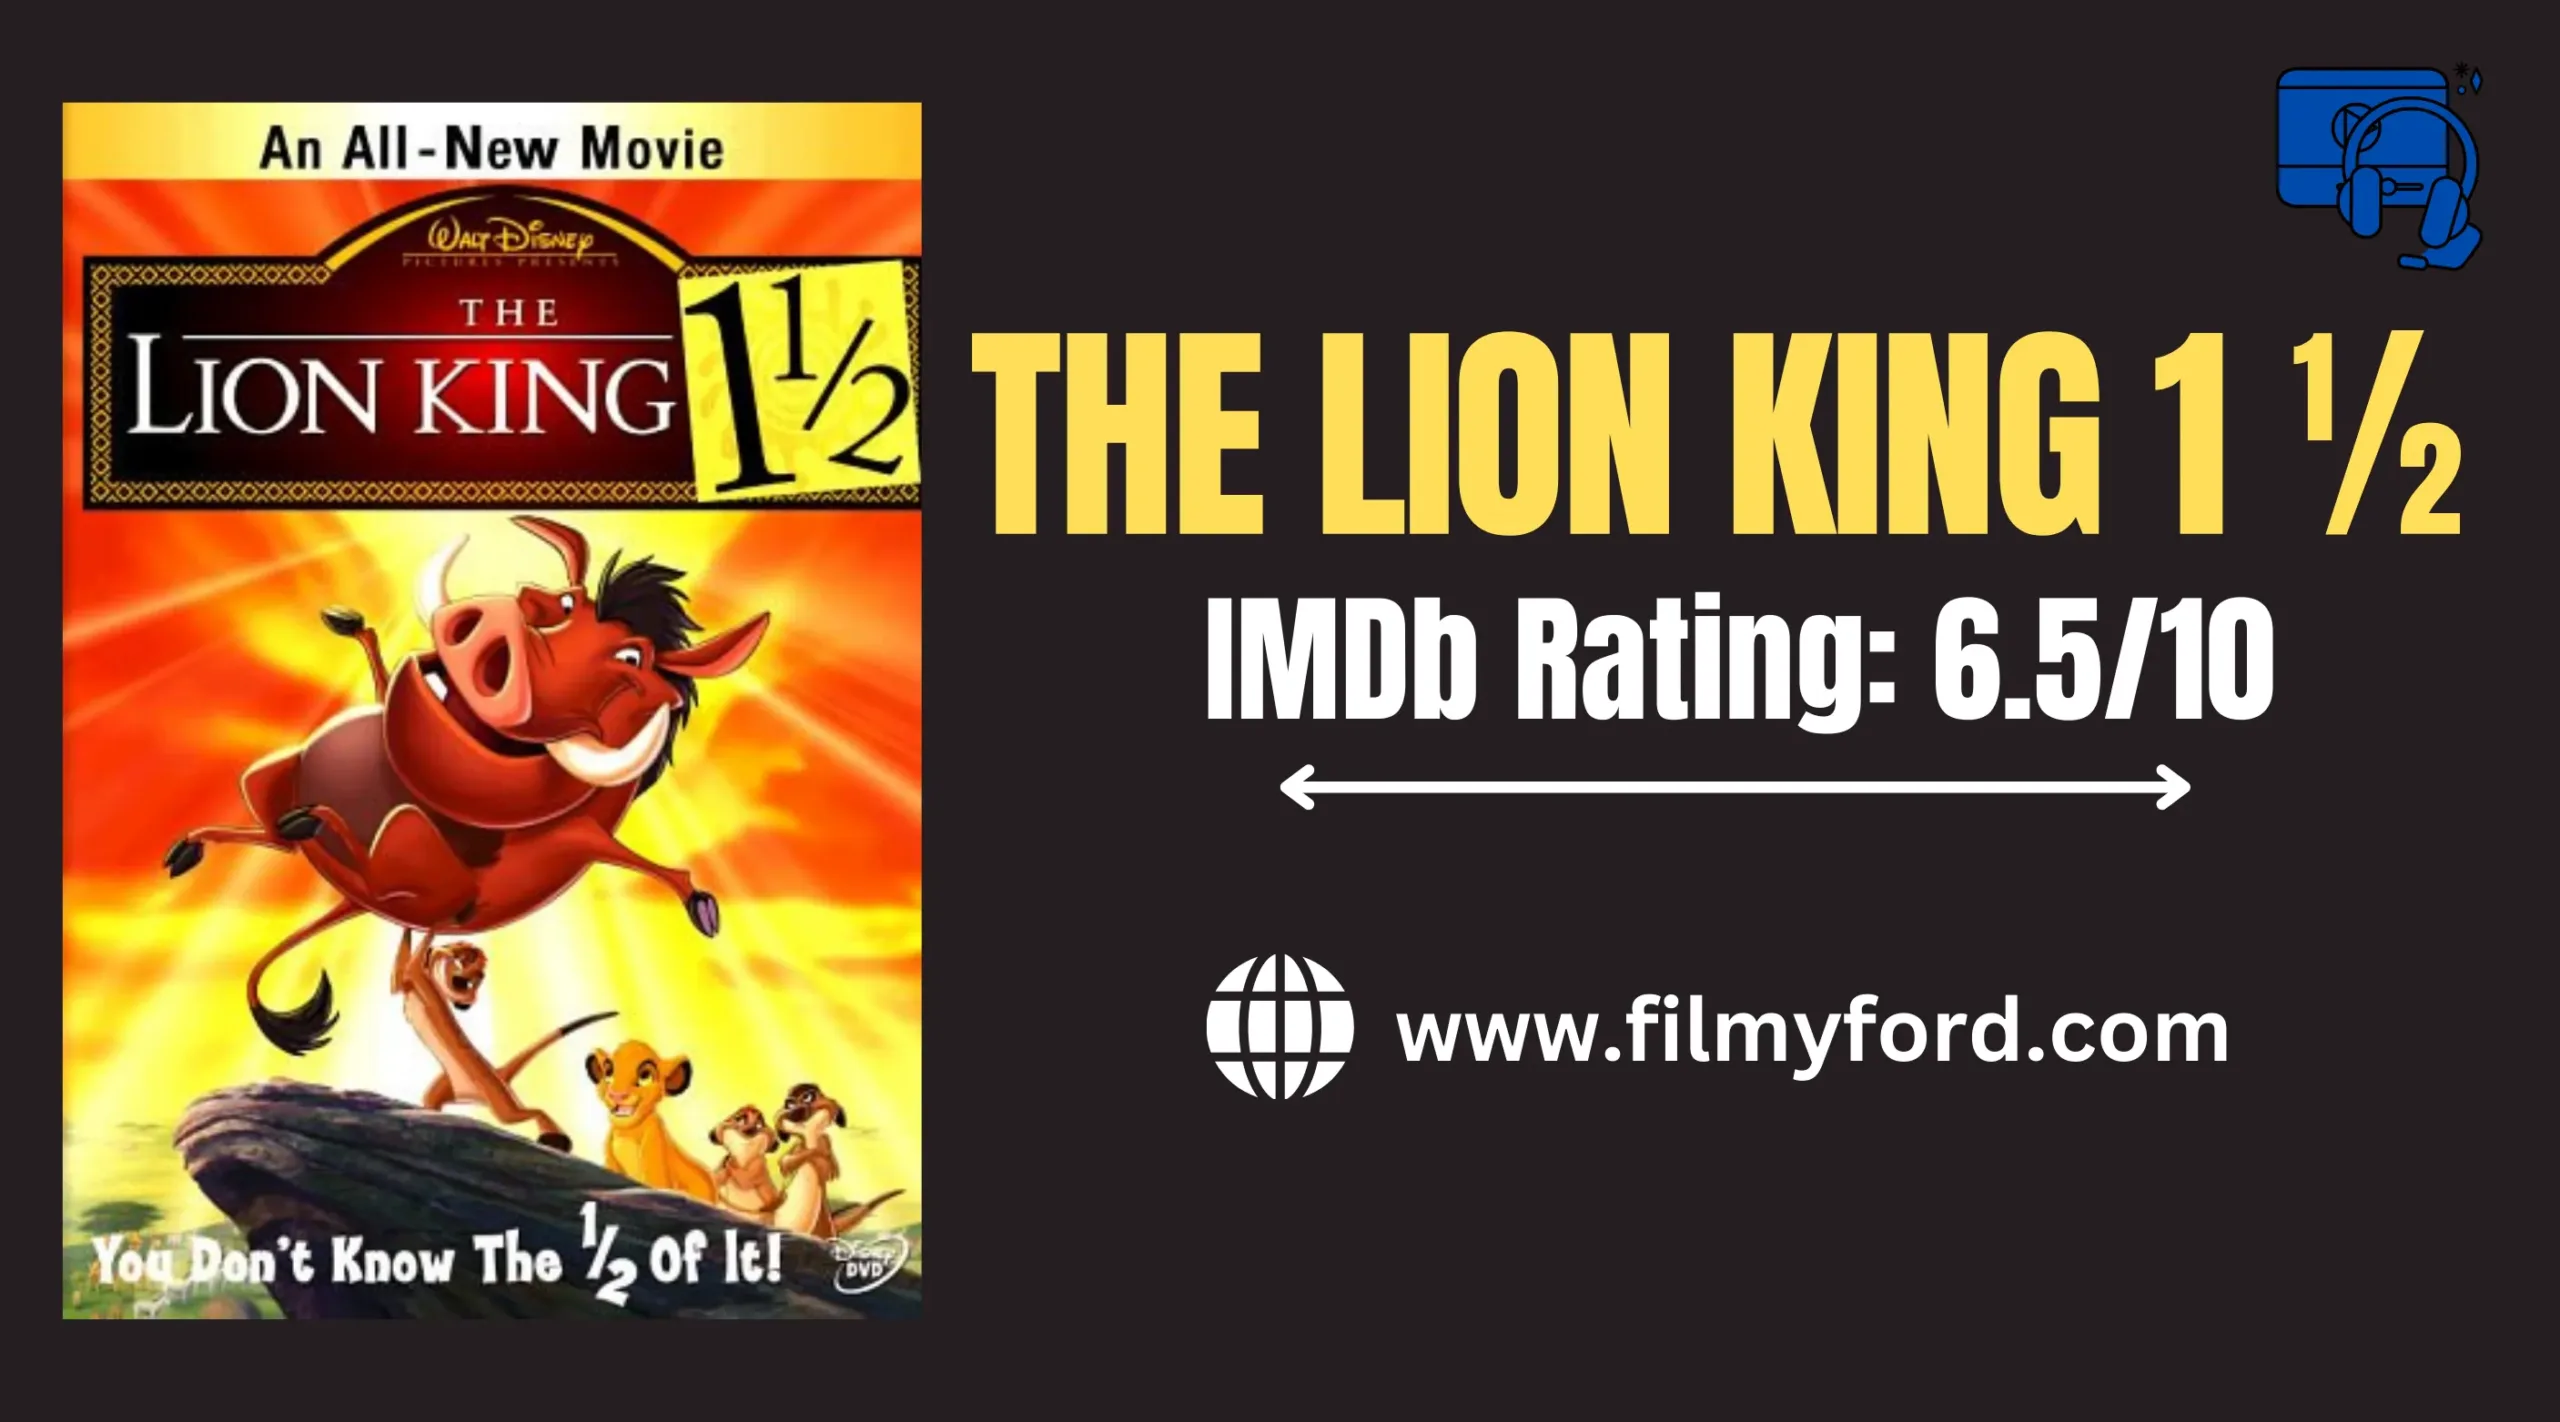 The Lion King 1 ½ (2004)